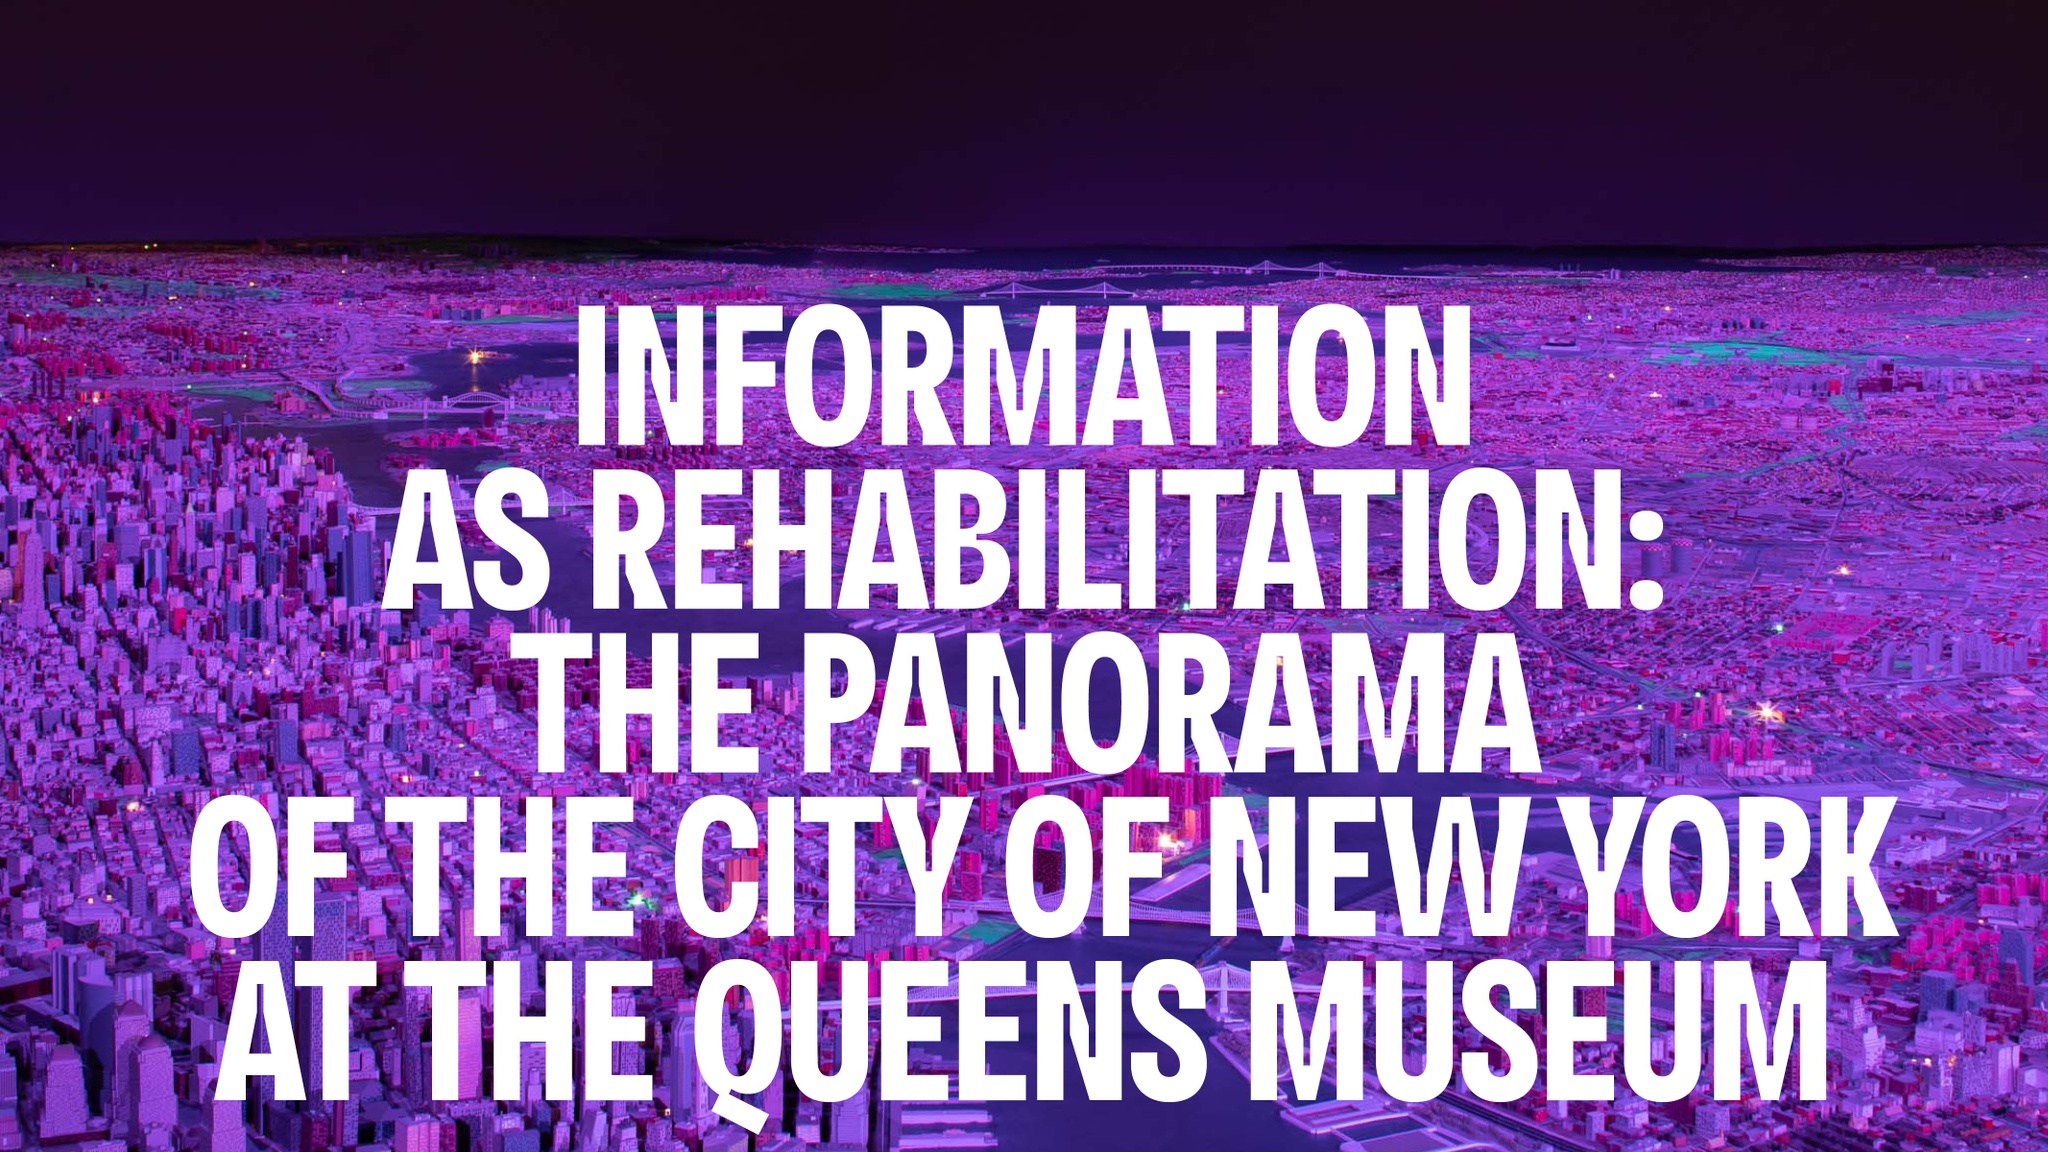 The essay title Information as Rehabilitation: The Panorama of the City of New York at the Queens Museum. The words are in white type over a model of New York City bathed in purple light.